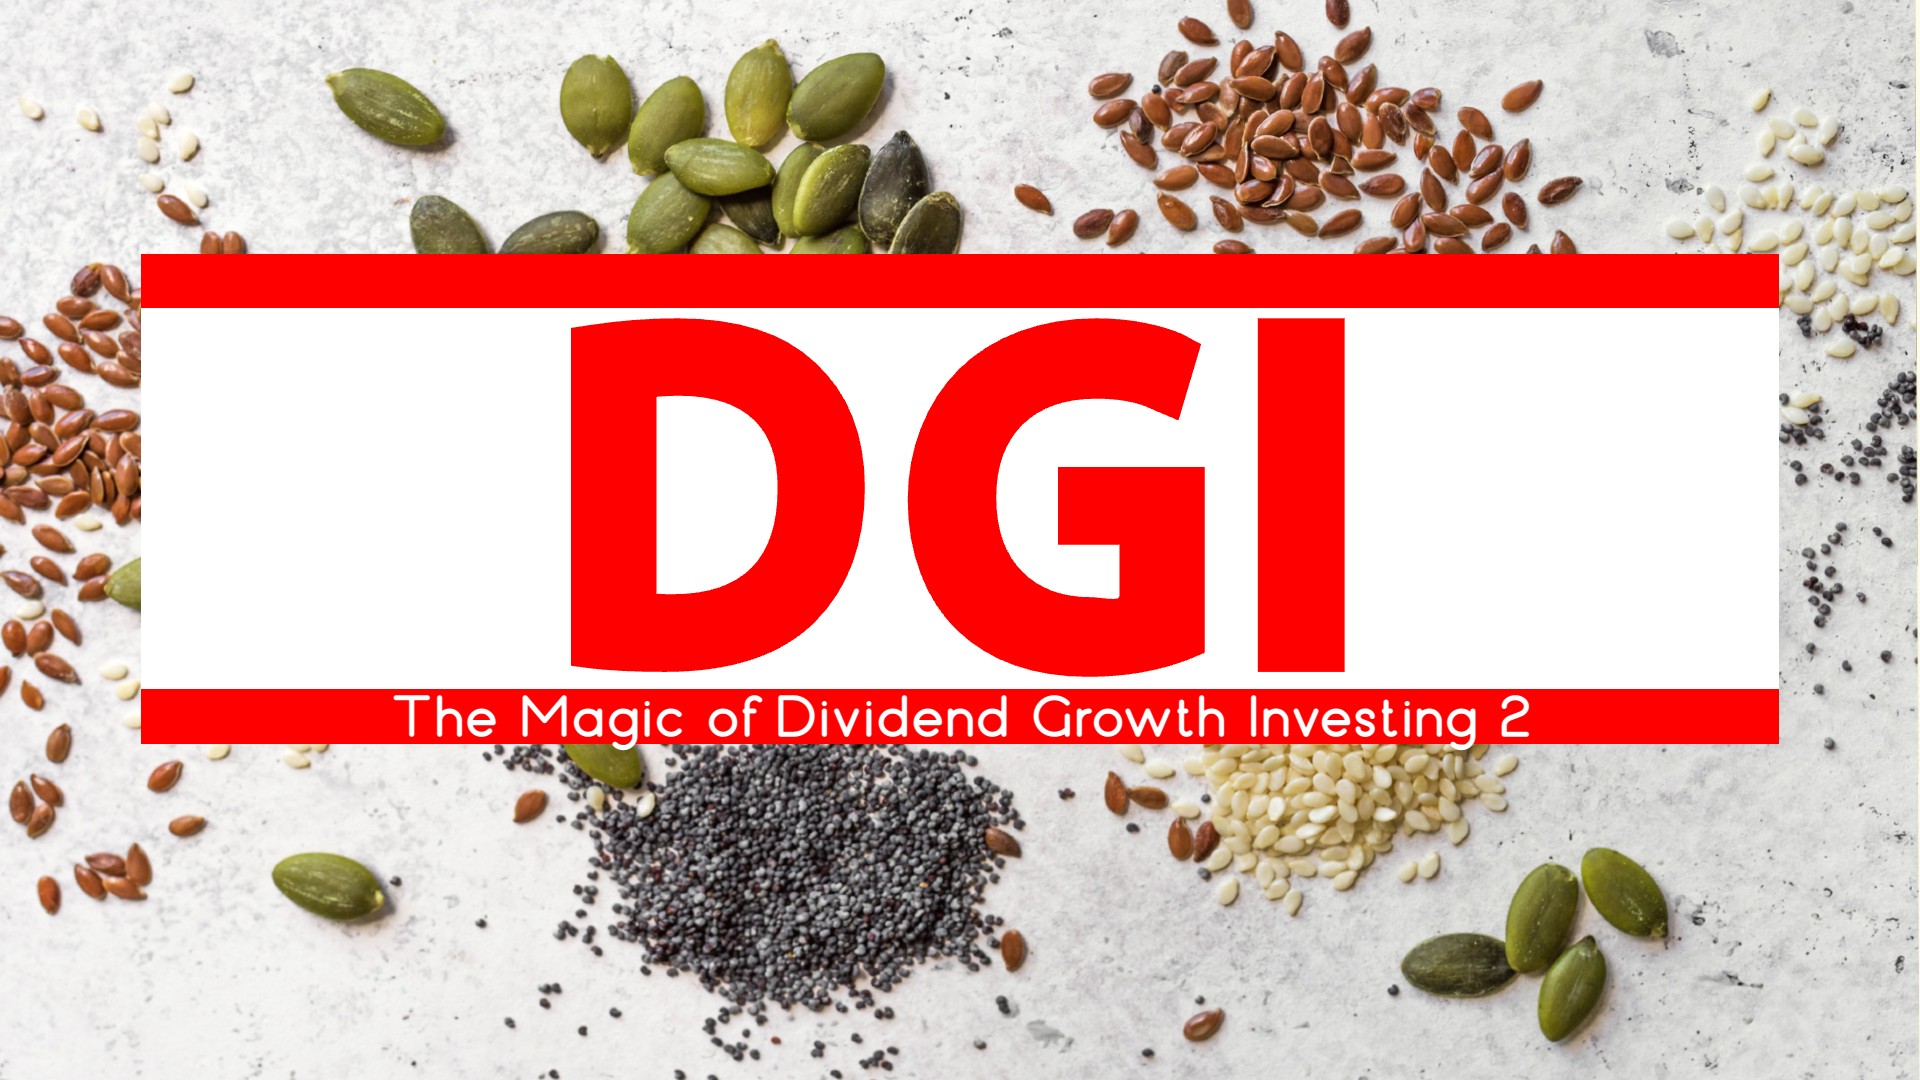 The Magic of Dividend Growth Investing 2